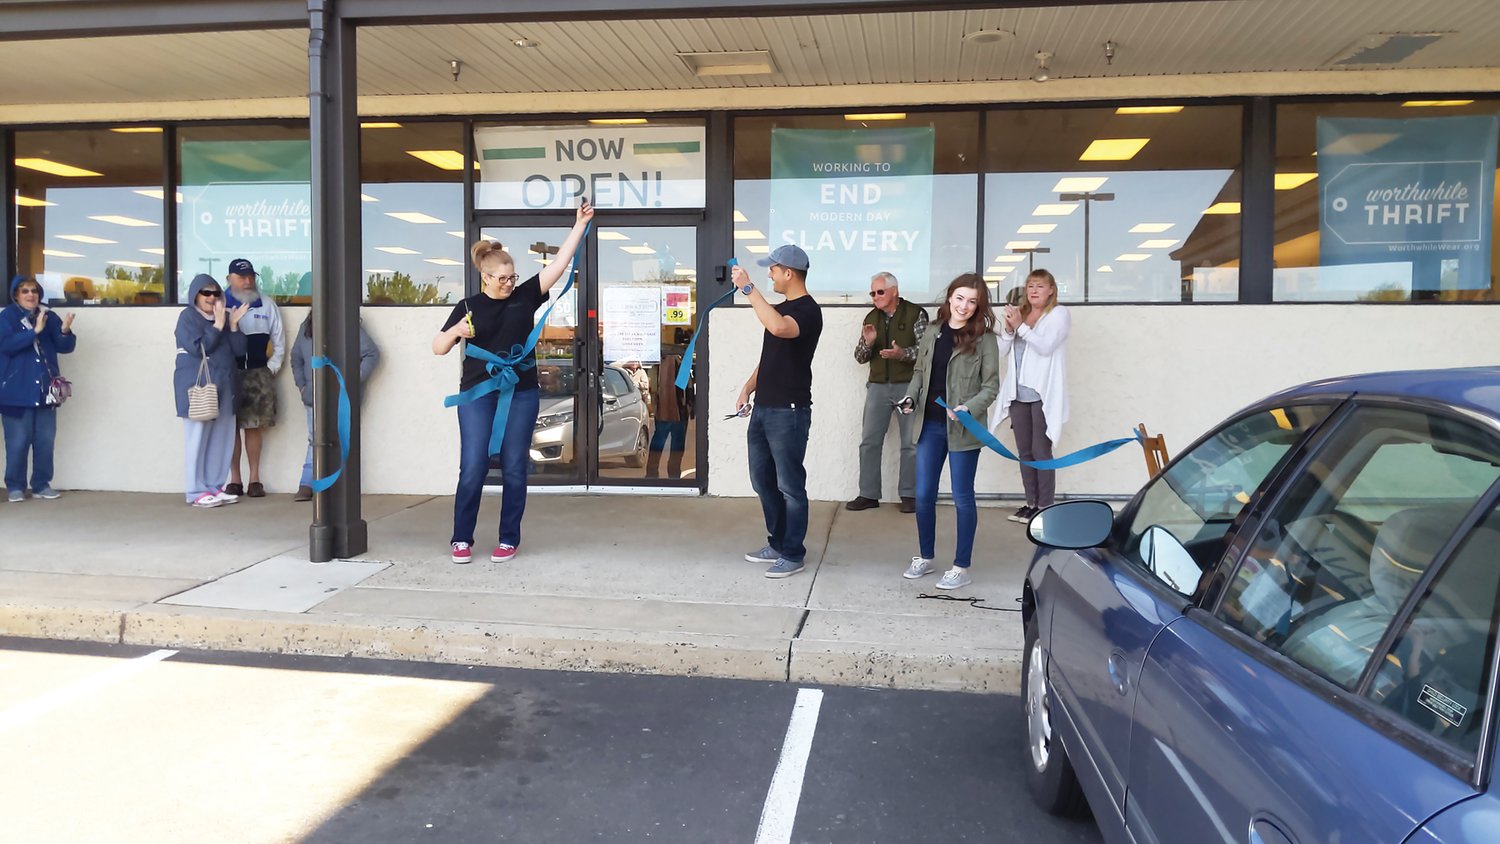 Dan Emr, Worthwhile Wear’s executive director, shared a few words of thanks before cutting the ribbon with fellow staff members at the new store in Plumsteadville.